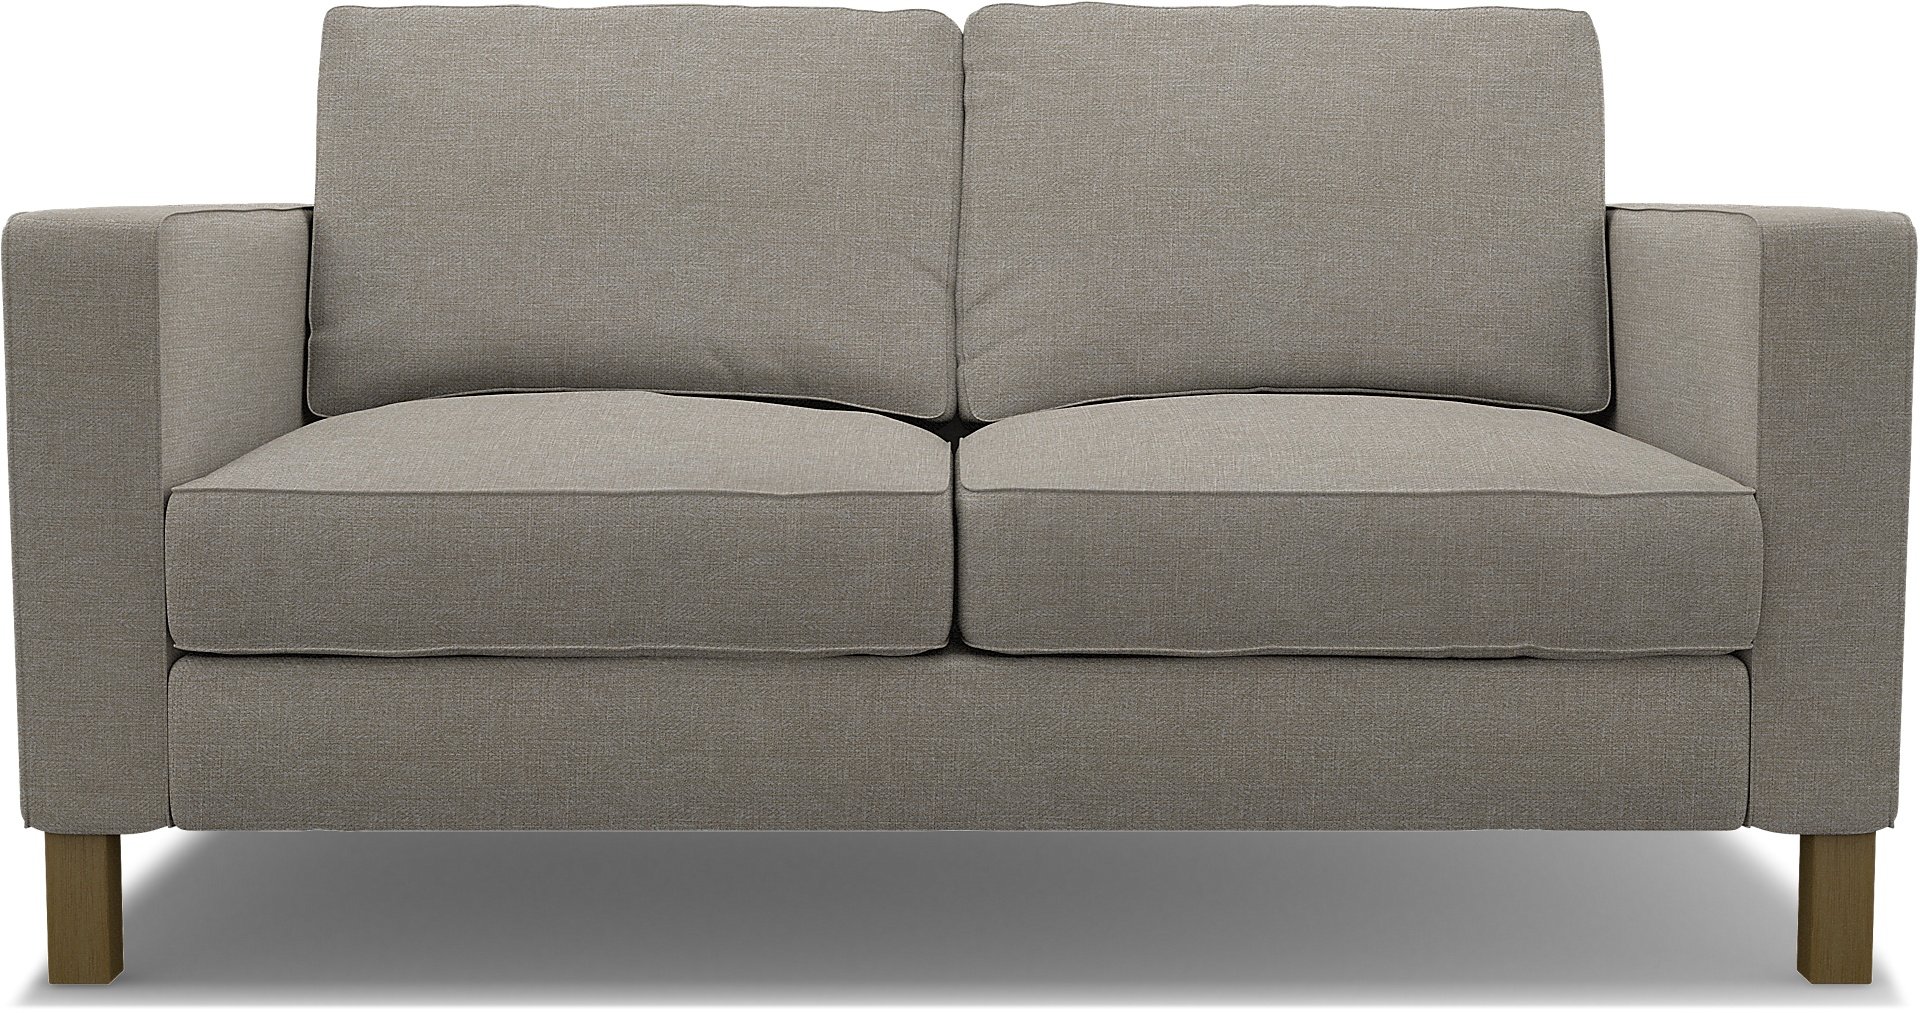 IKEA - Karlstad 2 Seater Sofa Cover, Greige, Boucle & Texture - Bemz